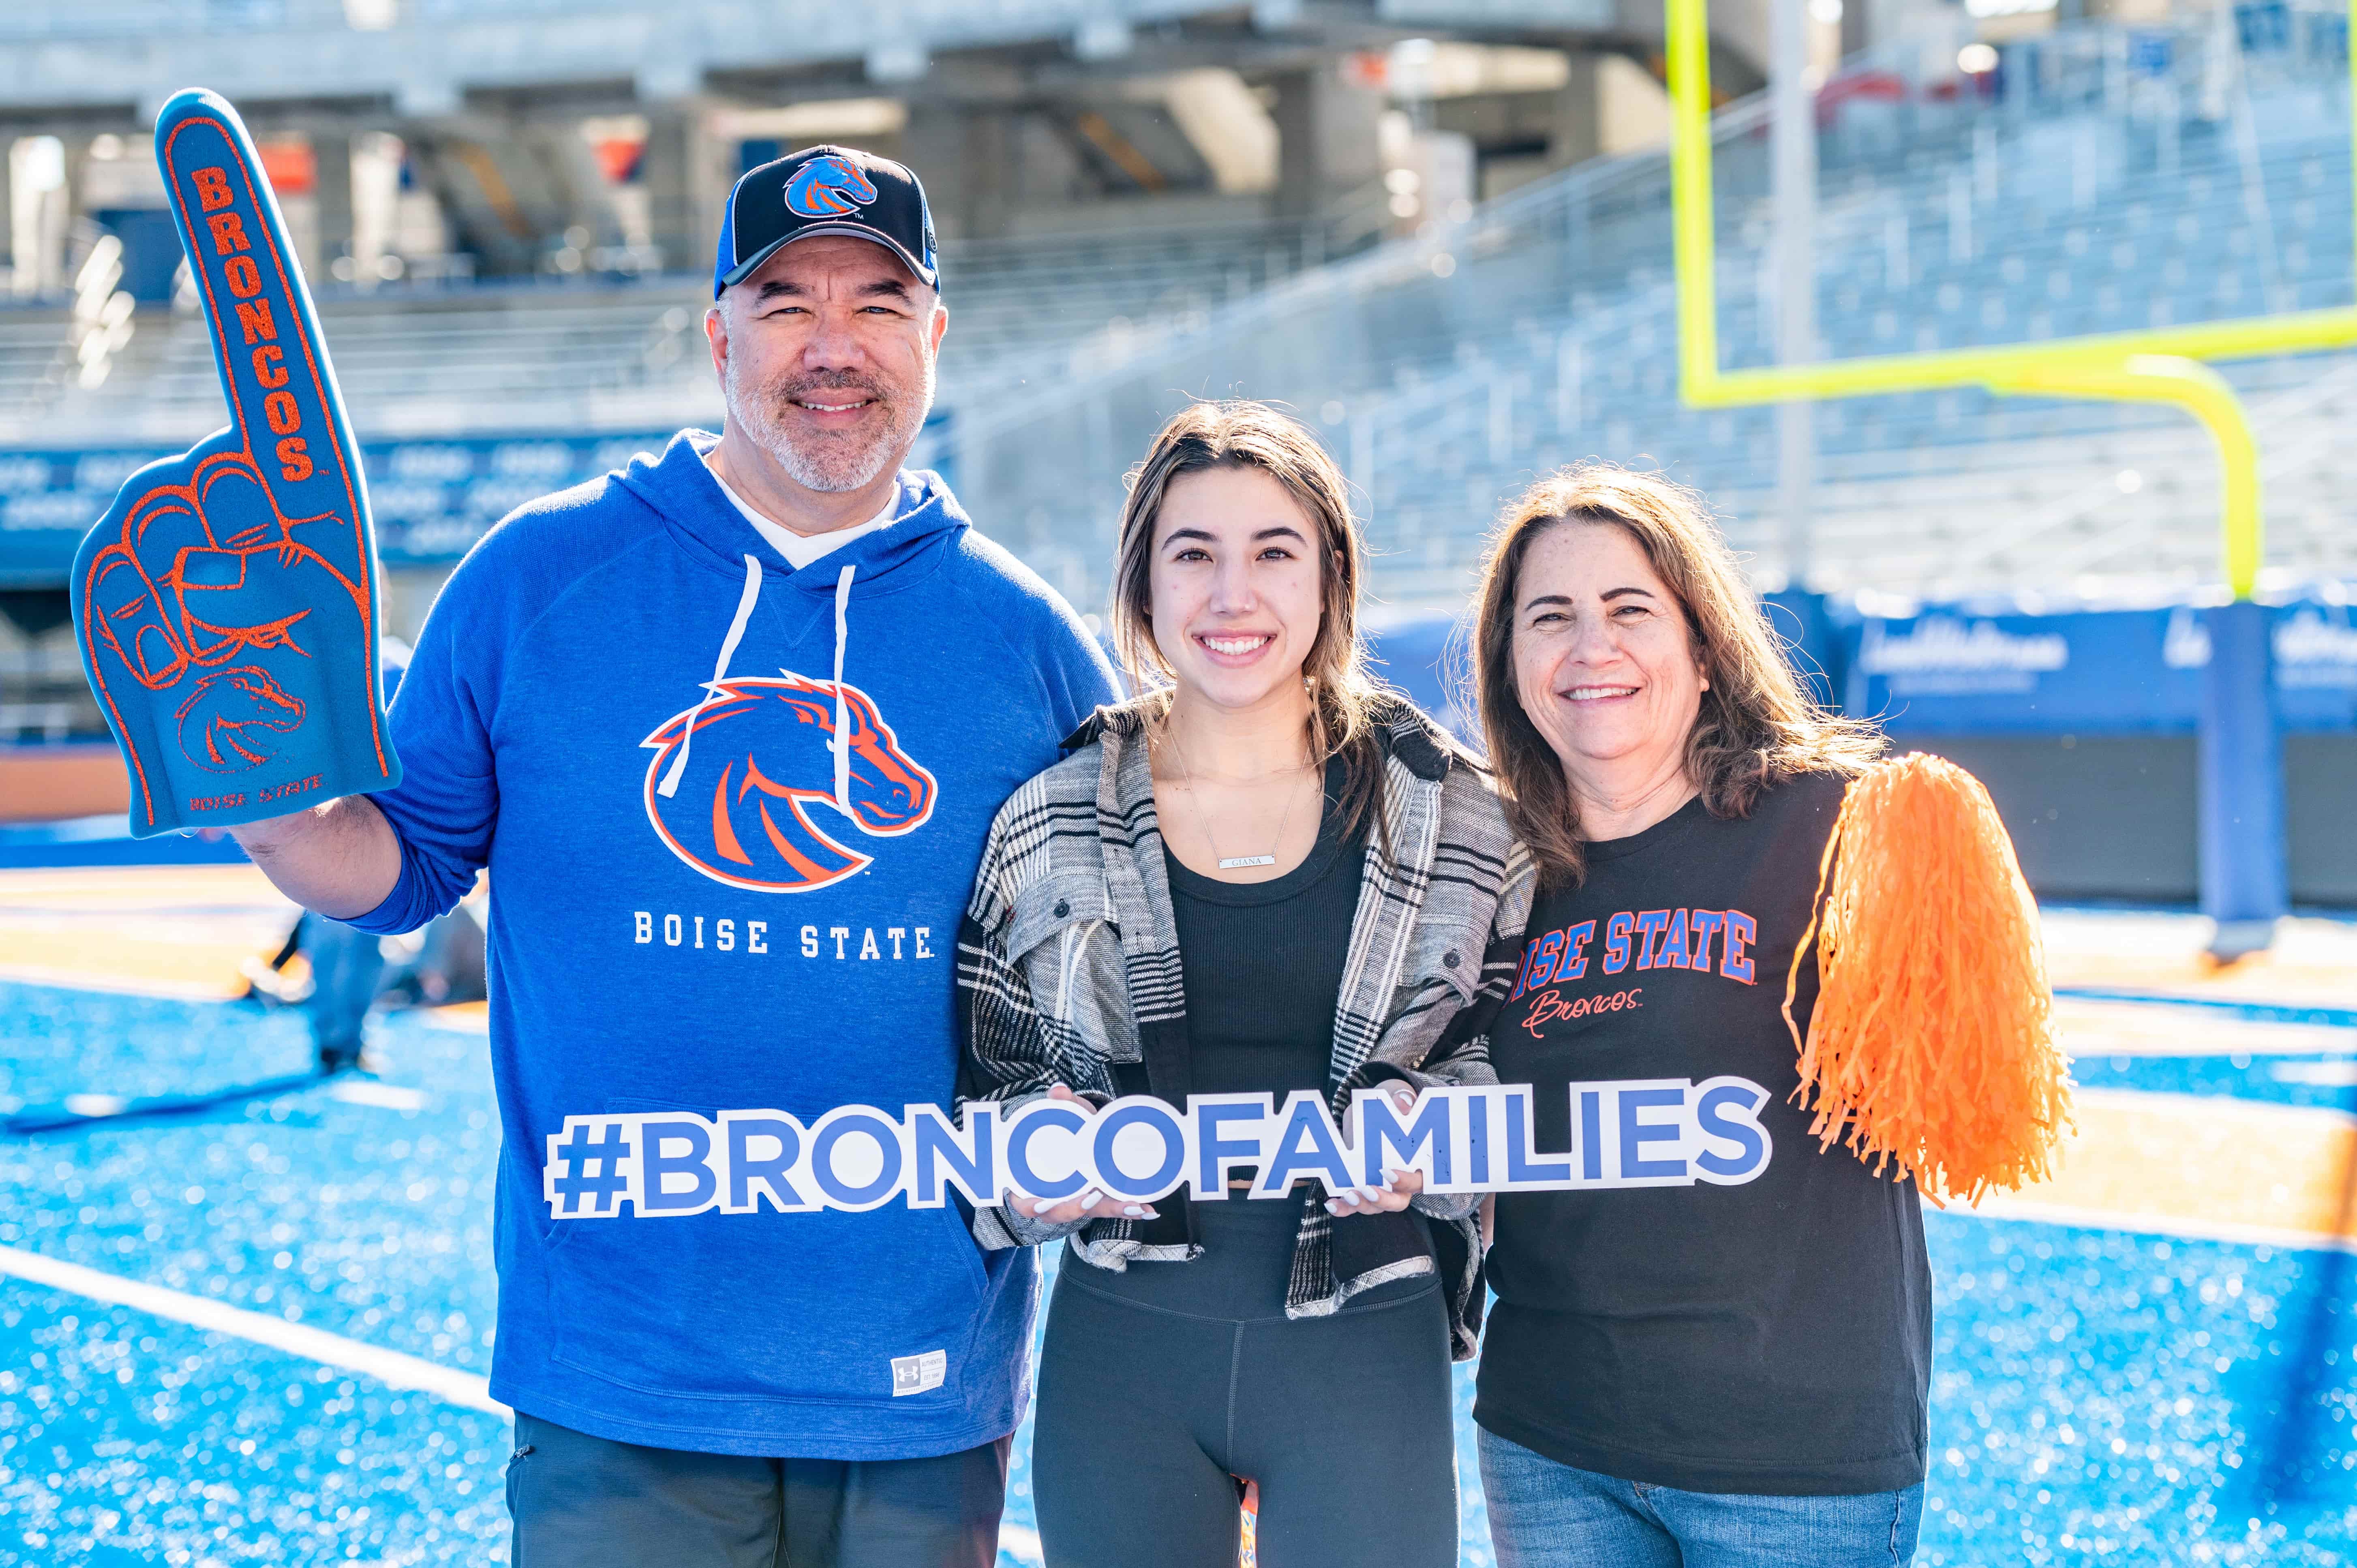 BSU student standing on blue turf with parents